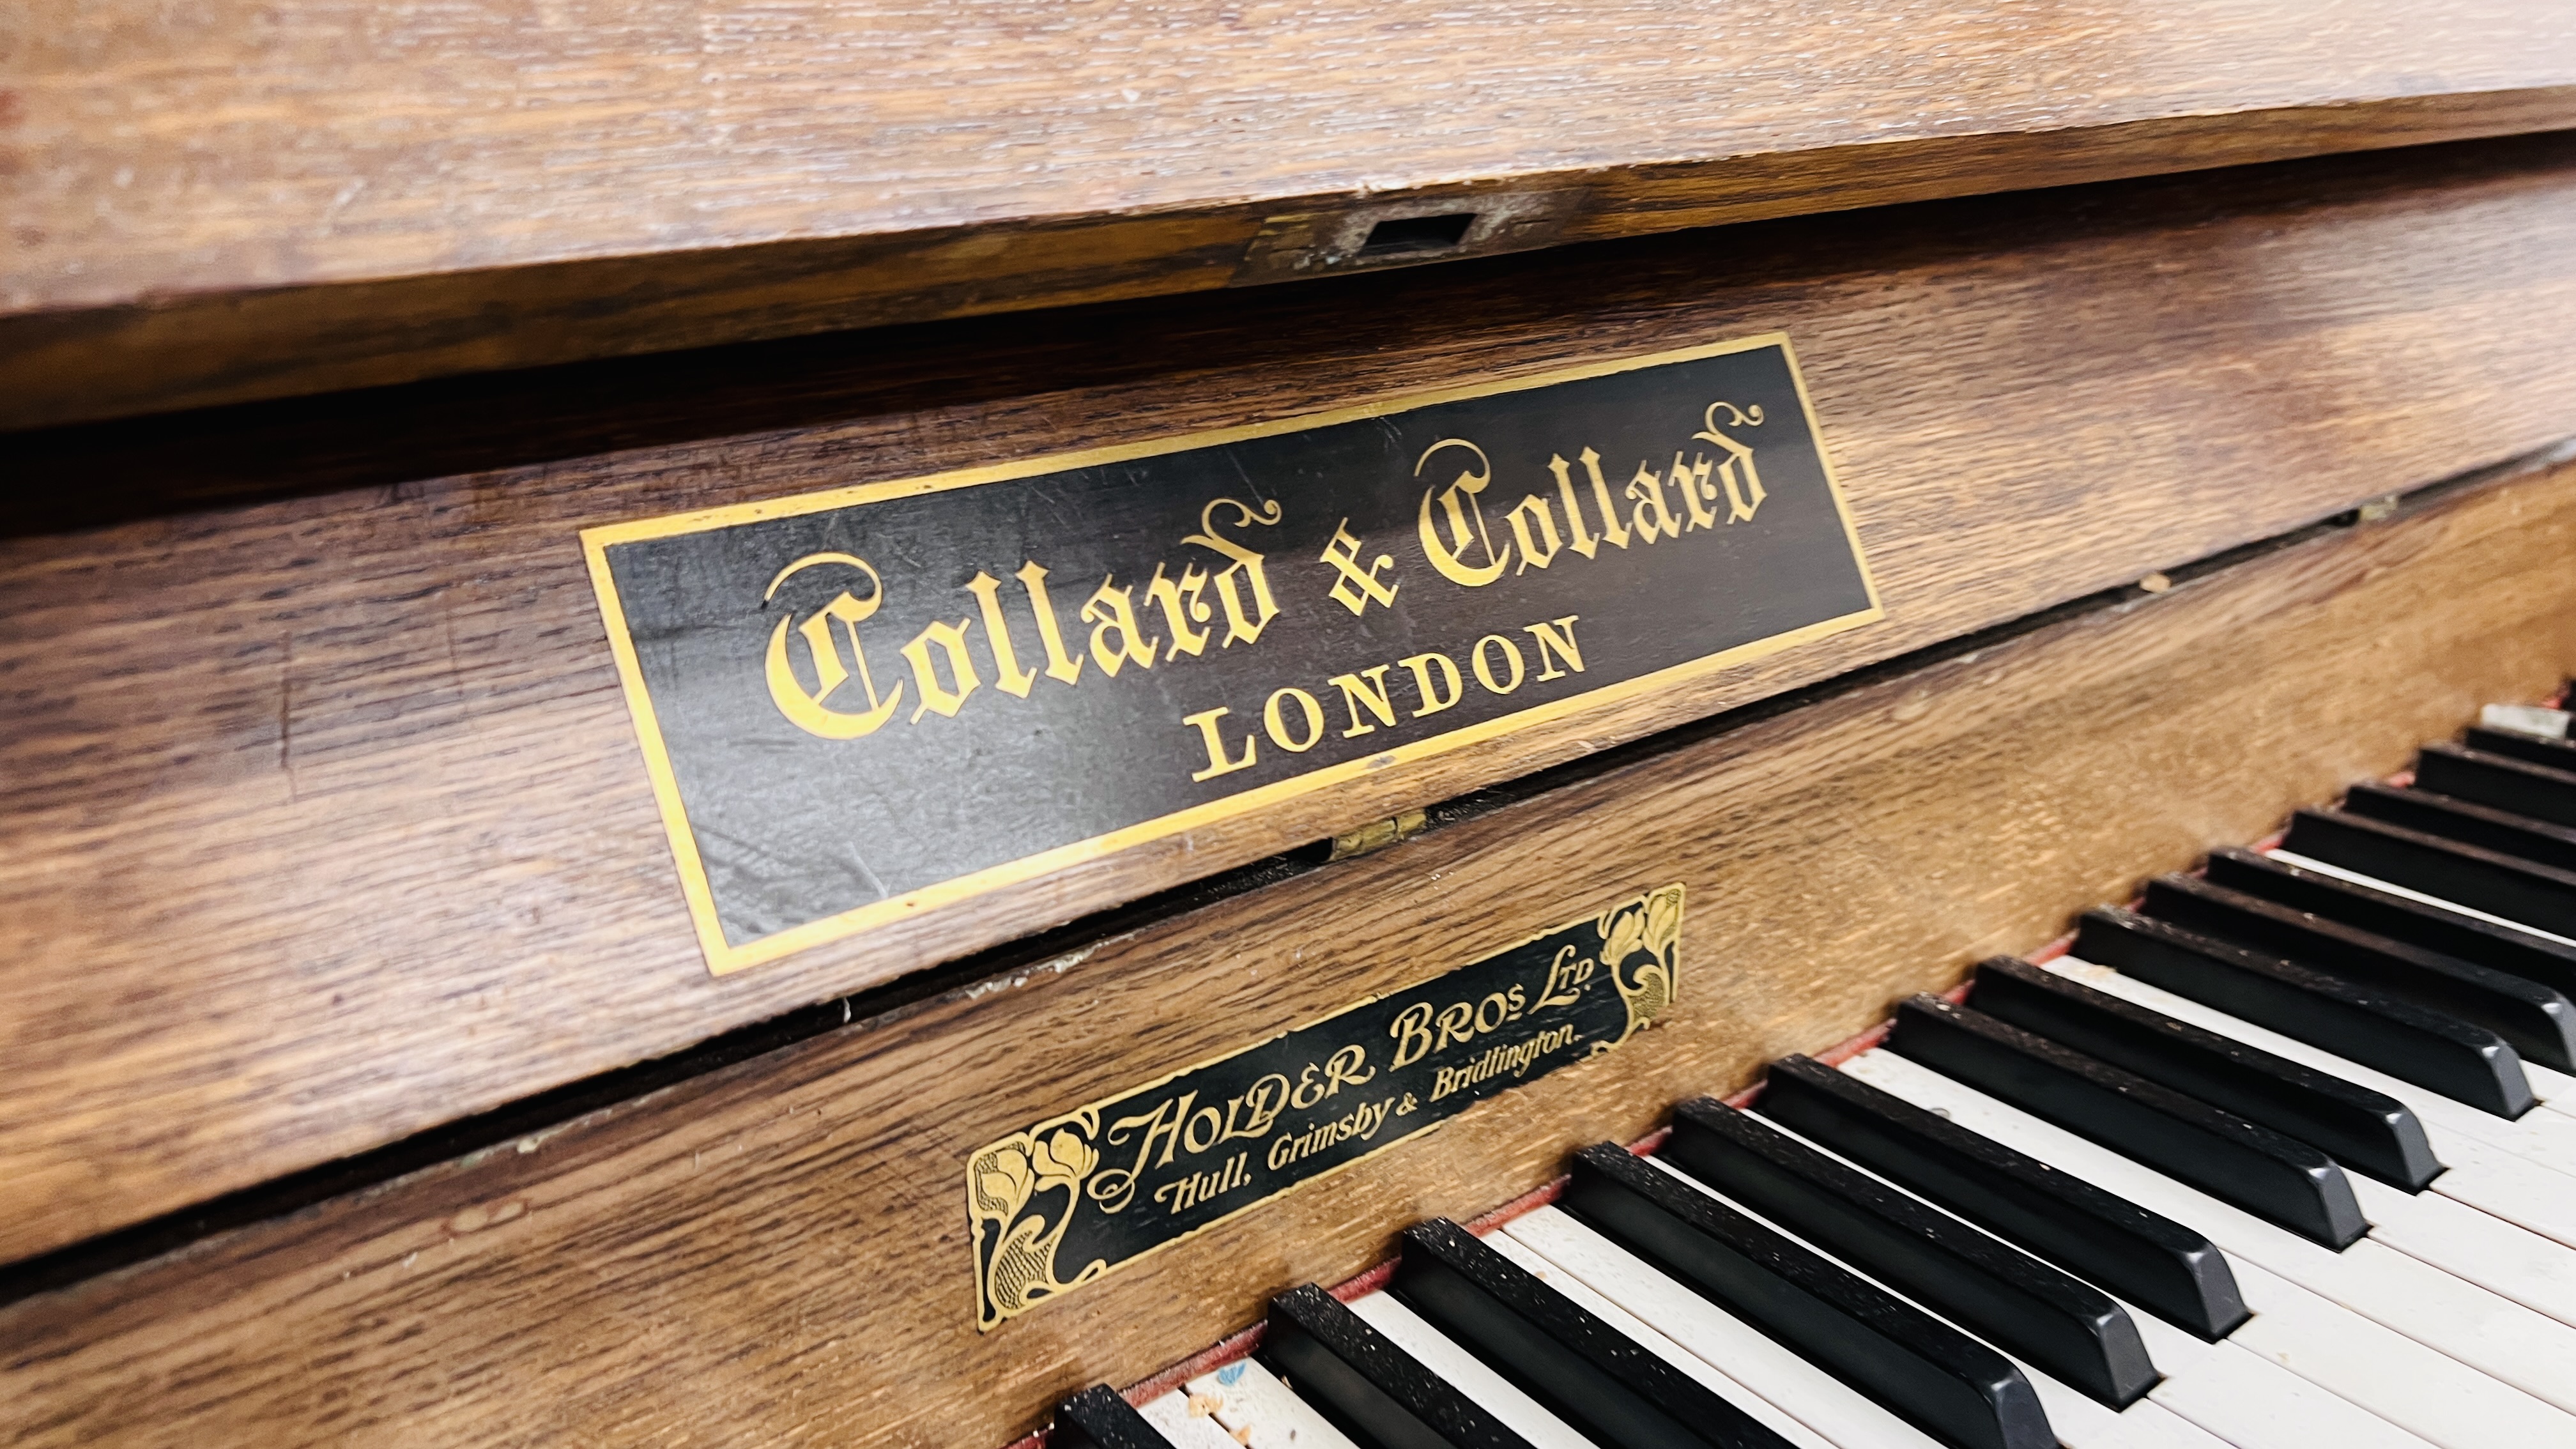 A VINTAGE OAK ARTS AND CRAFTS PIANO WITH ORIGINAL MAKERS LABEL COLLARD & COLLARD HOLDER BROS. - Image 3 of 12